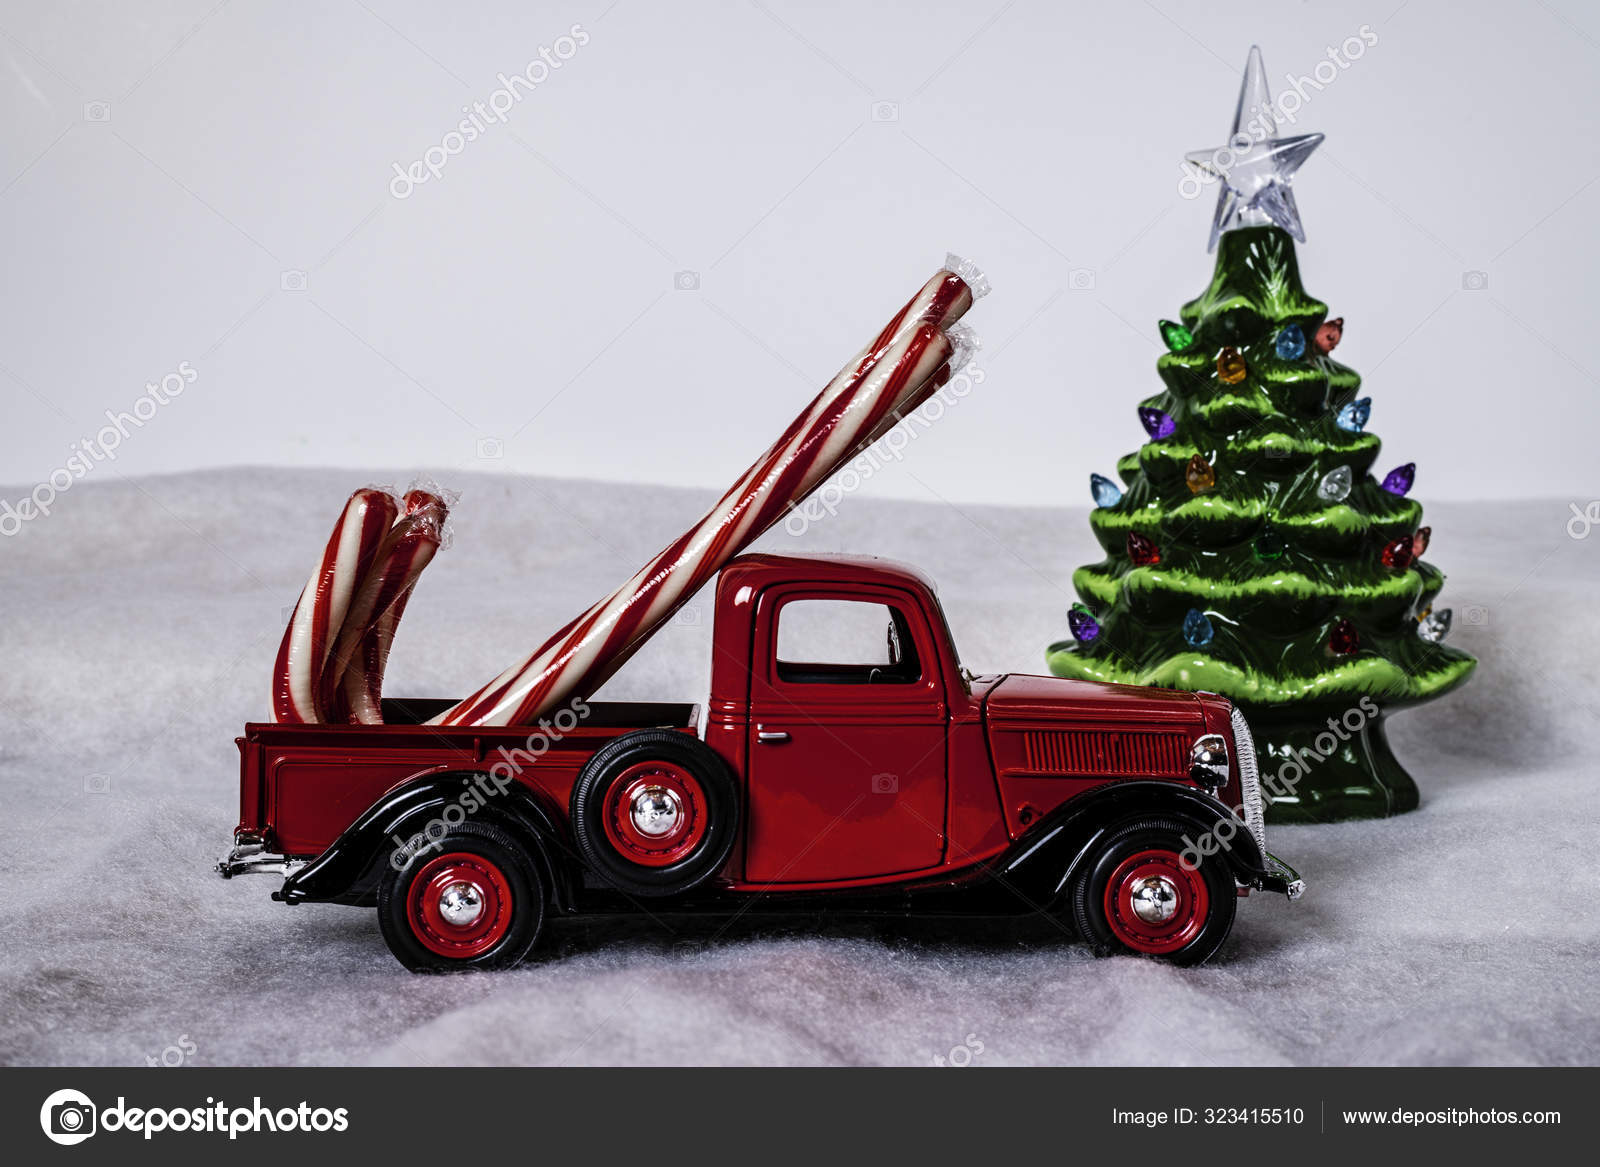 large red toy truck